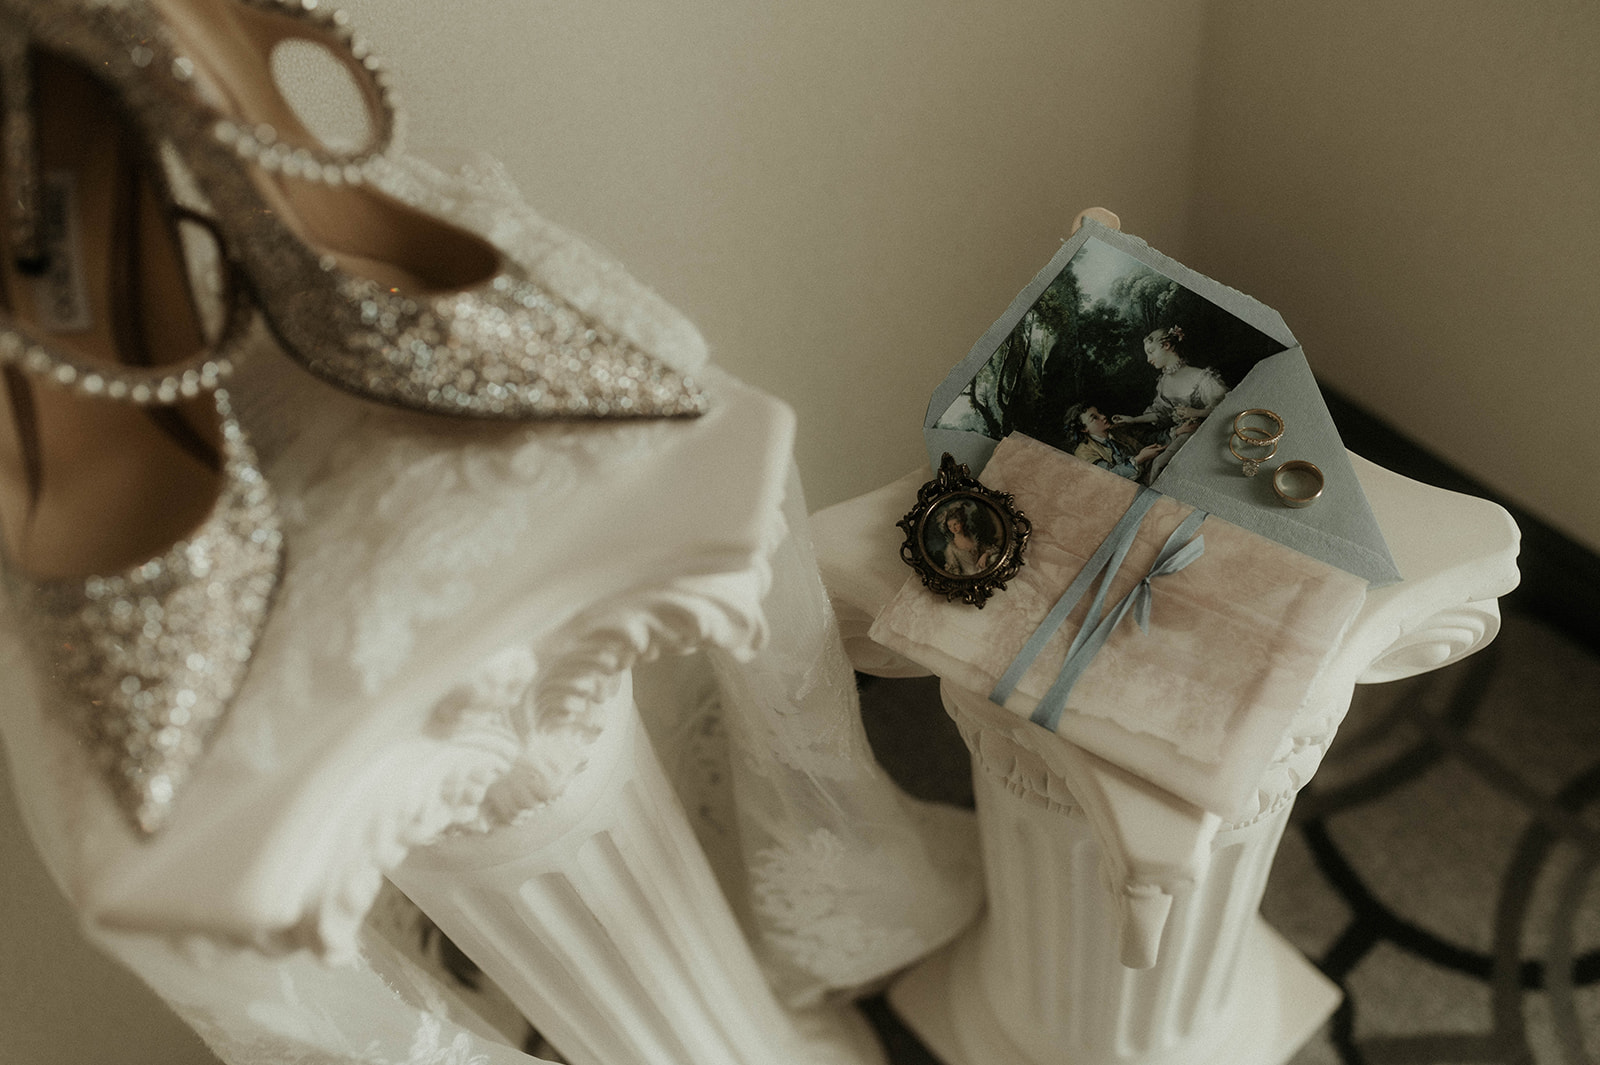 A sepia-toned photo of a wedding dress and sparkly high-heeled shoes displayed on classical white columns, with a small photo frame beside them.